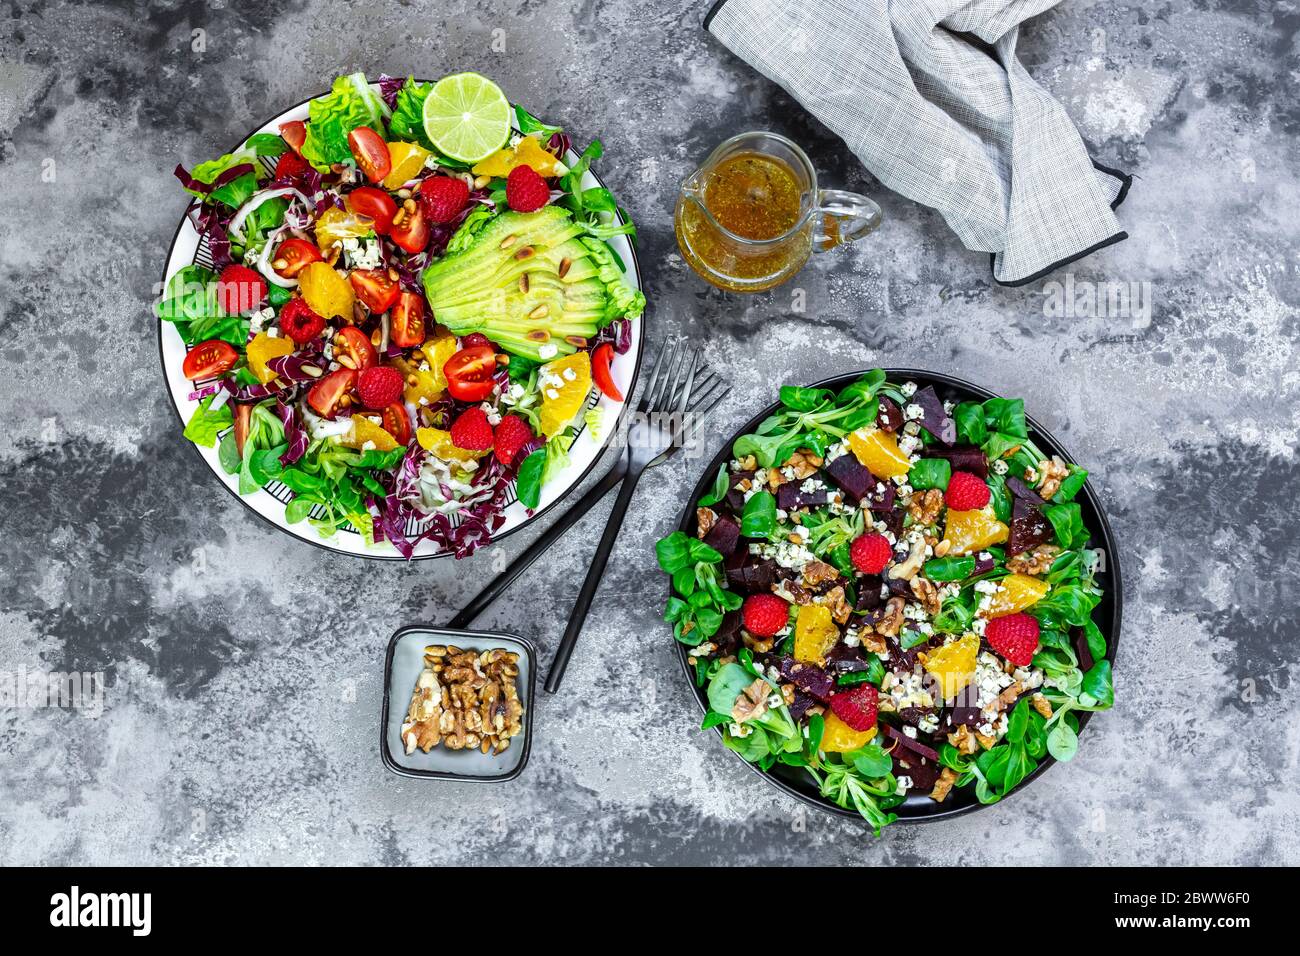 Two plates of mixed fruit-vegetable salads Stock Photo